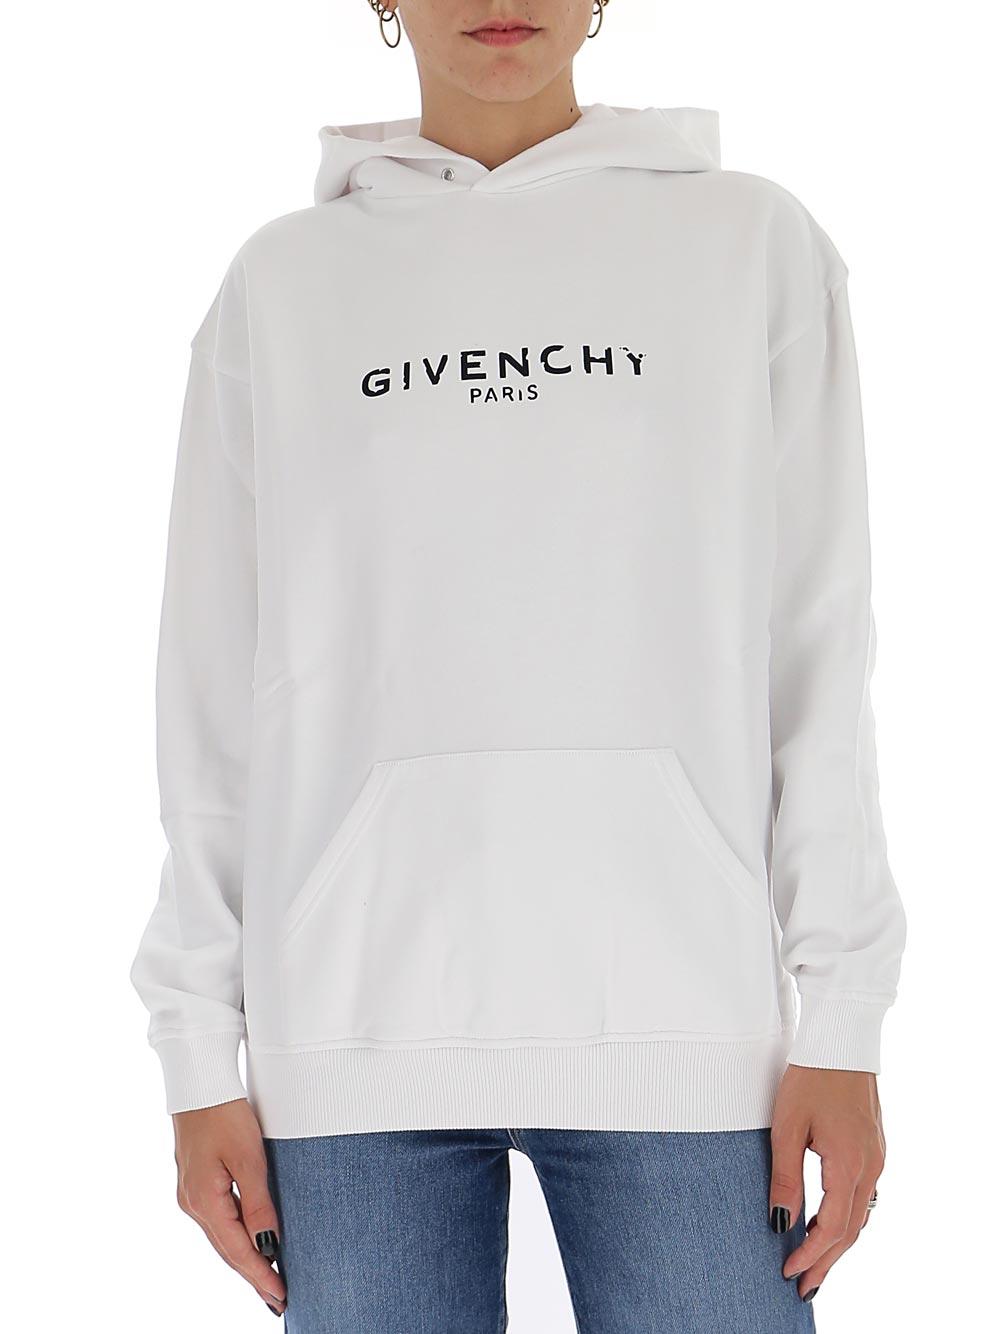 Givenchy Cotton Logo Printed Hoodie in White - Lyst